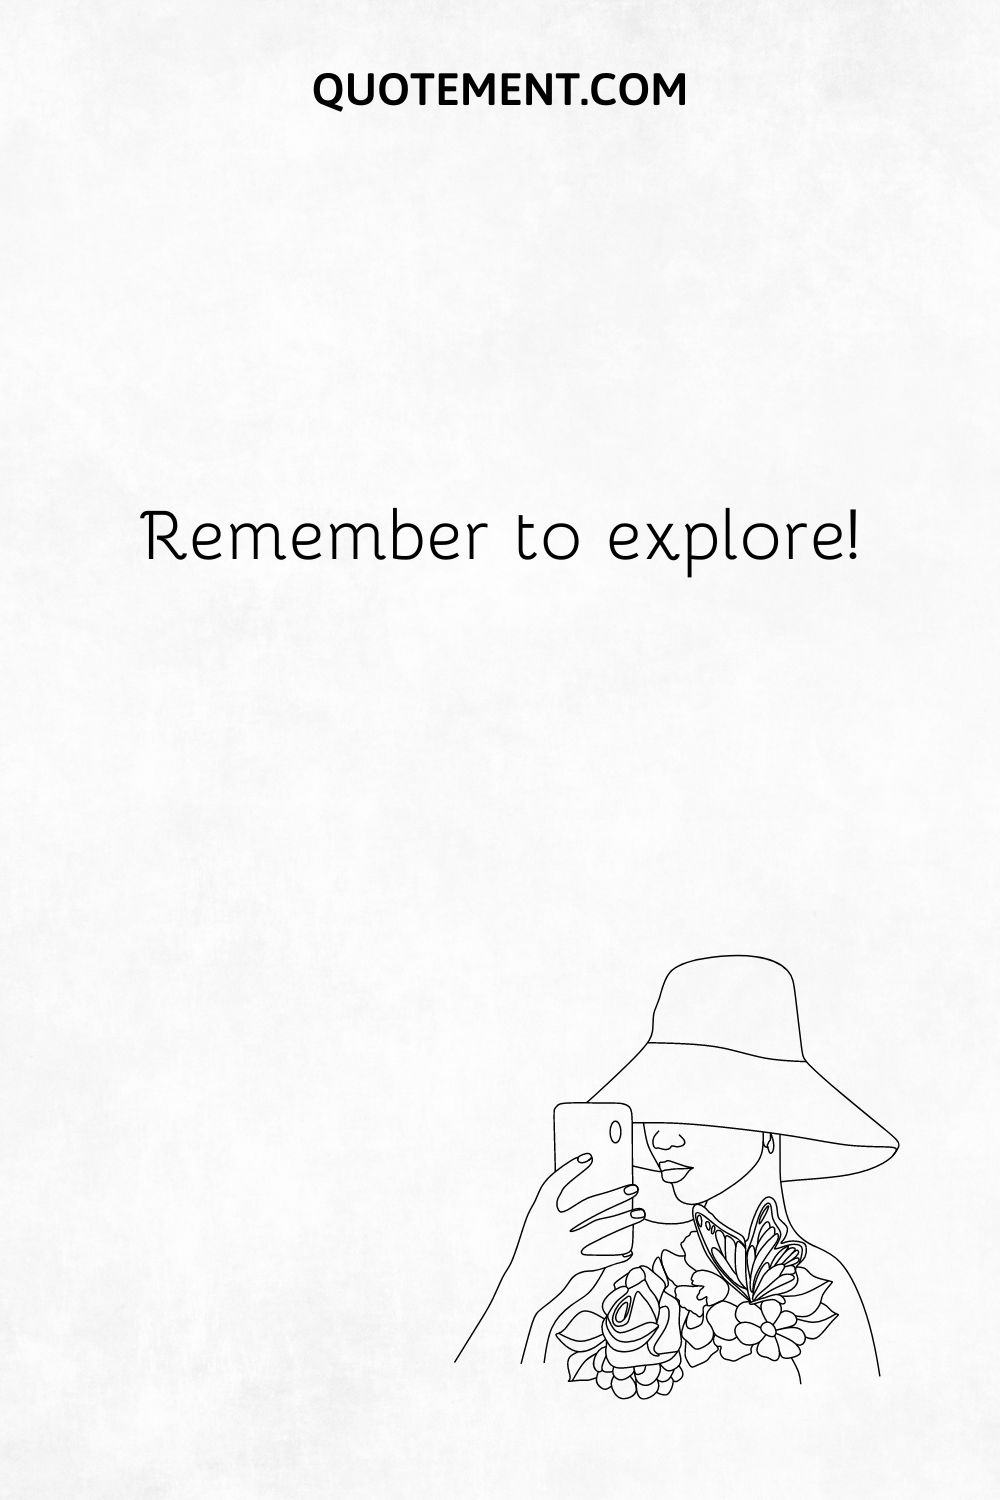 Remember to explore!